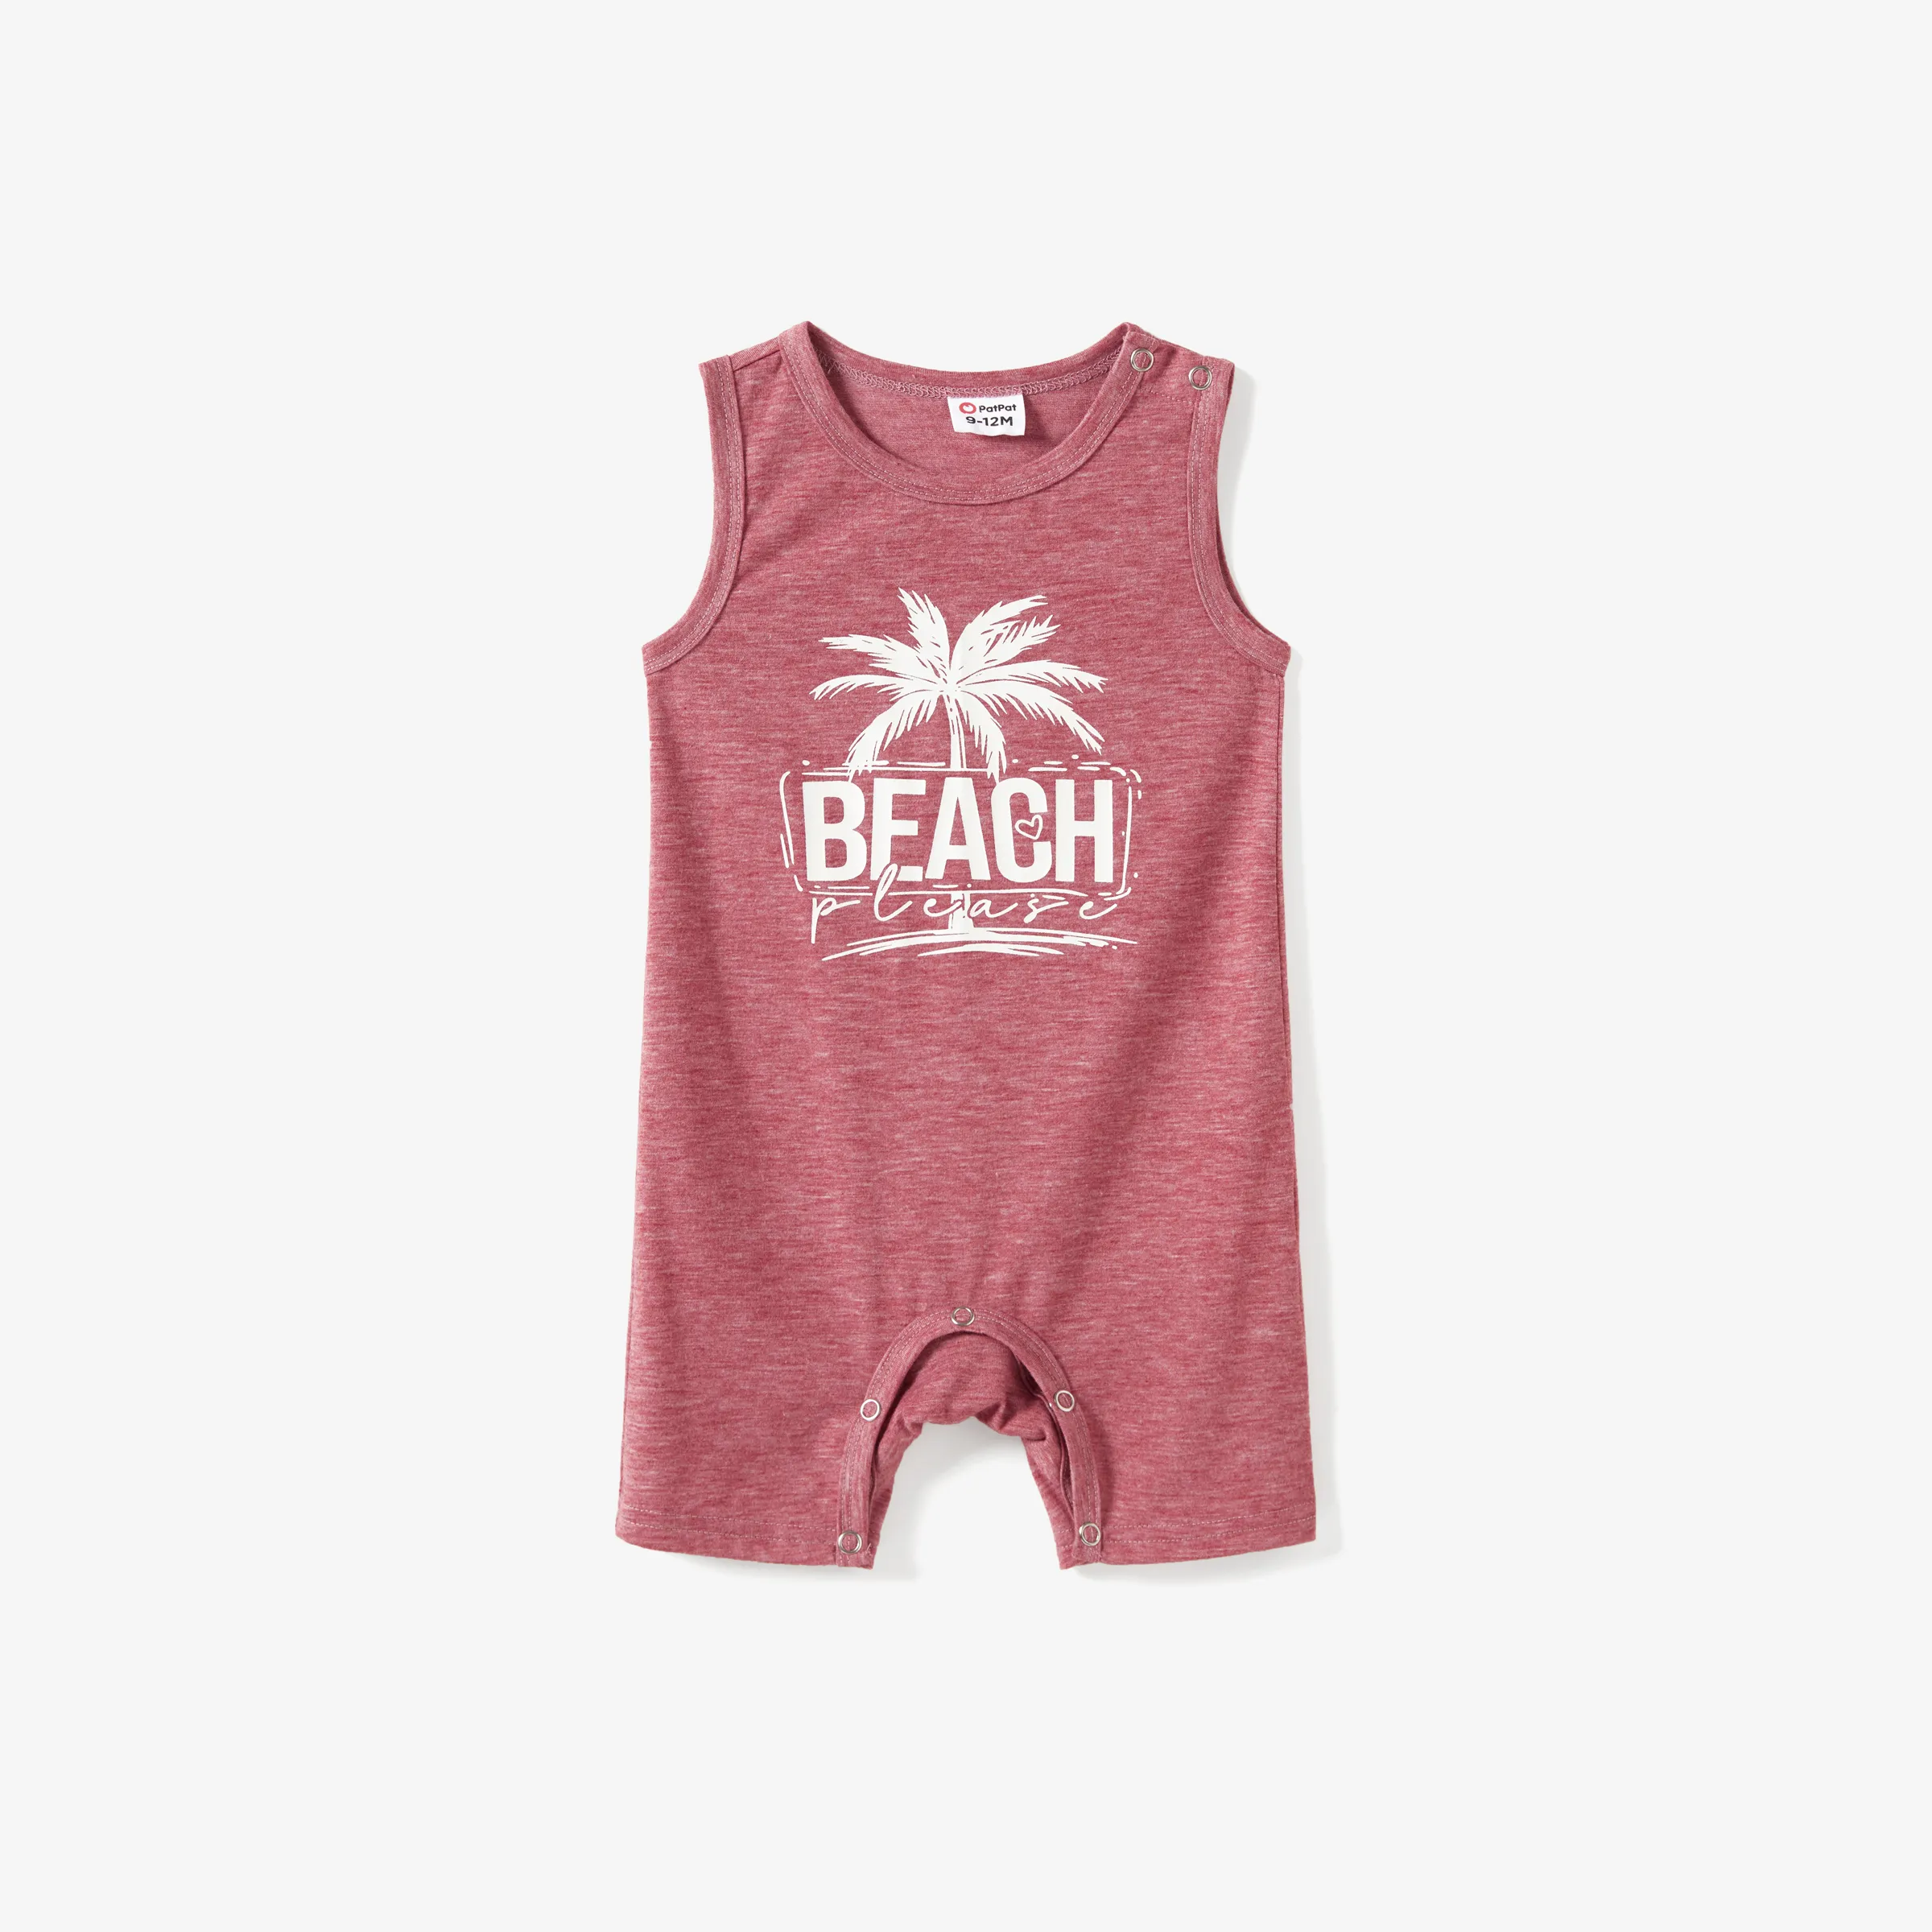 

Mommy and Me Pink Round Neck Sleeveless Tasseled Trim Coconut Tree Graphic Beach Dress